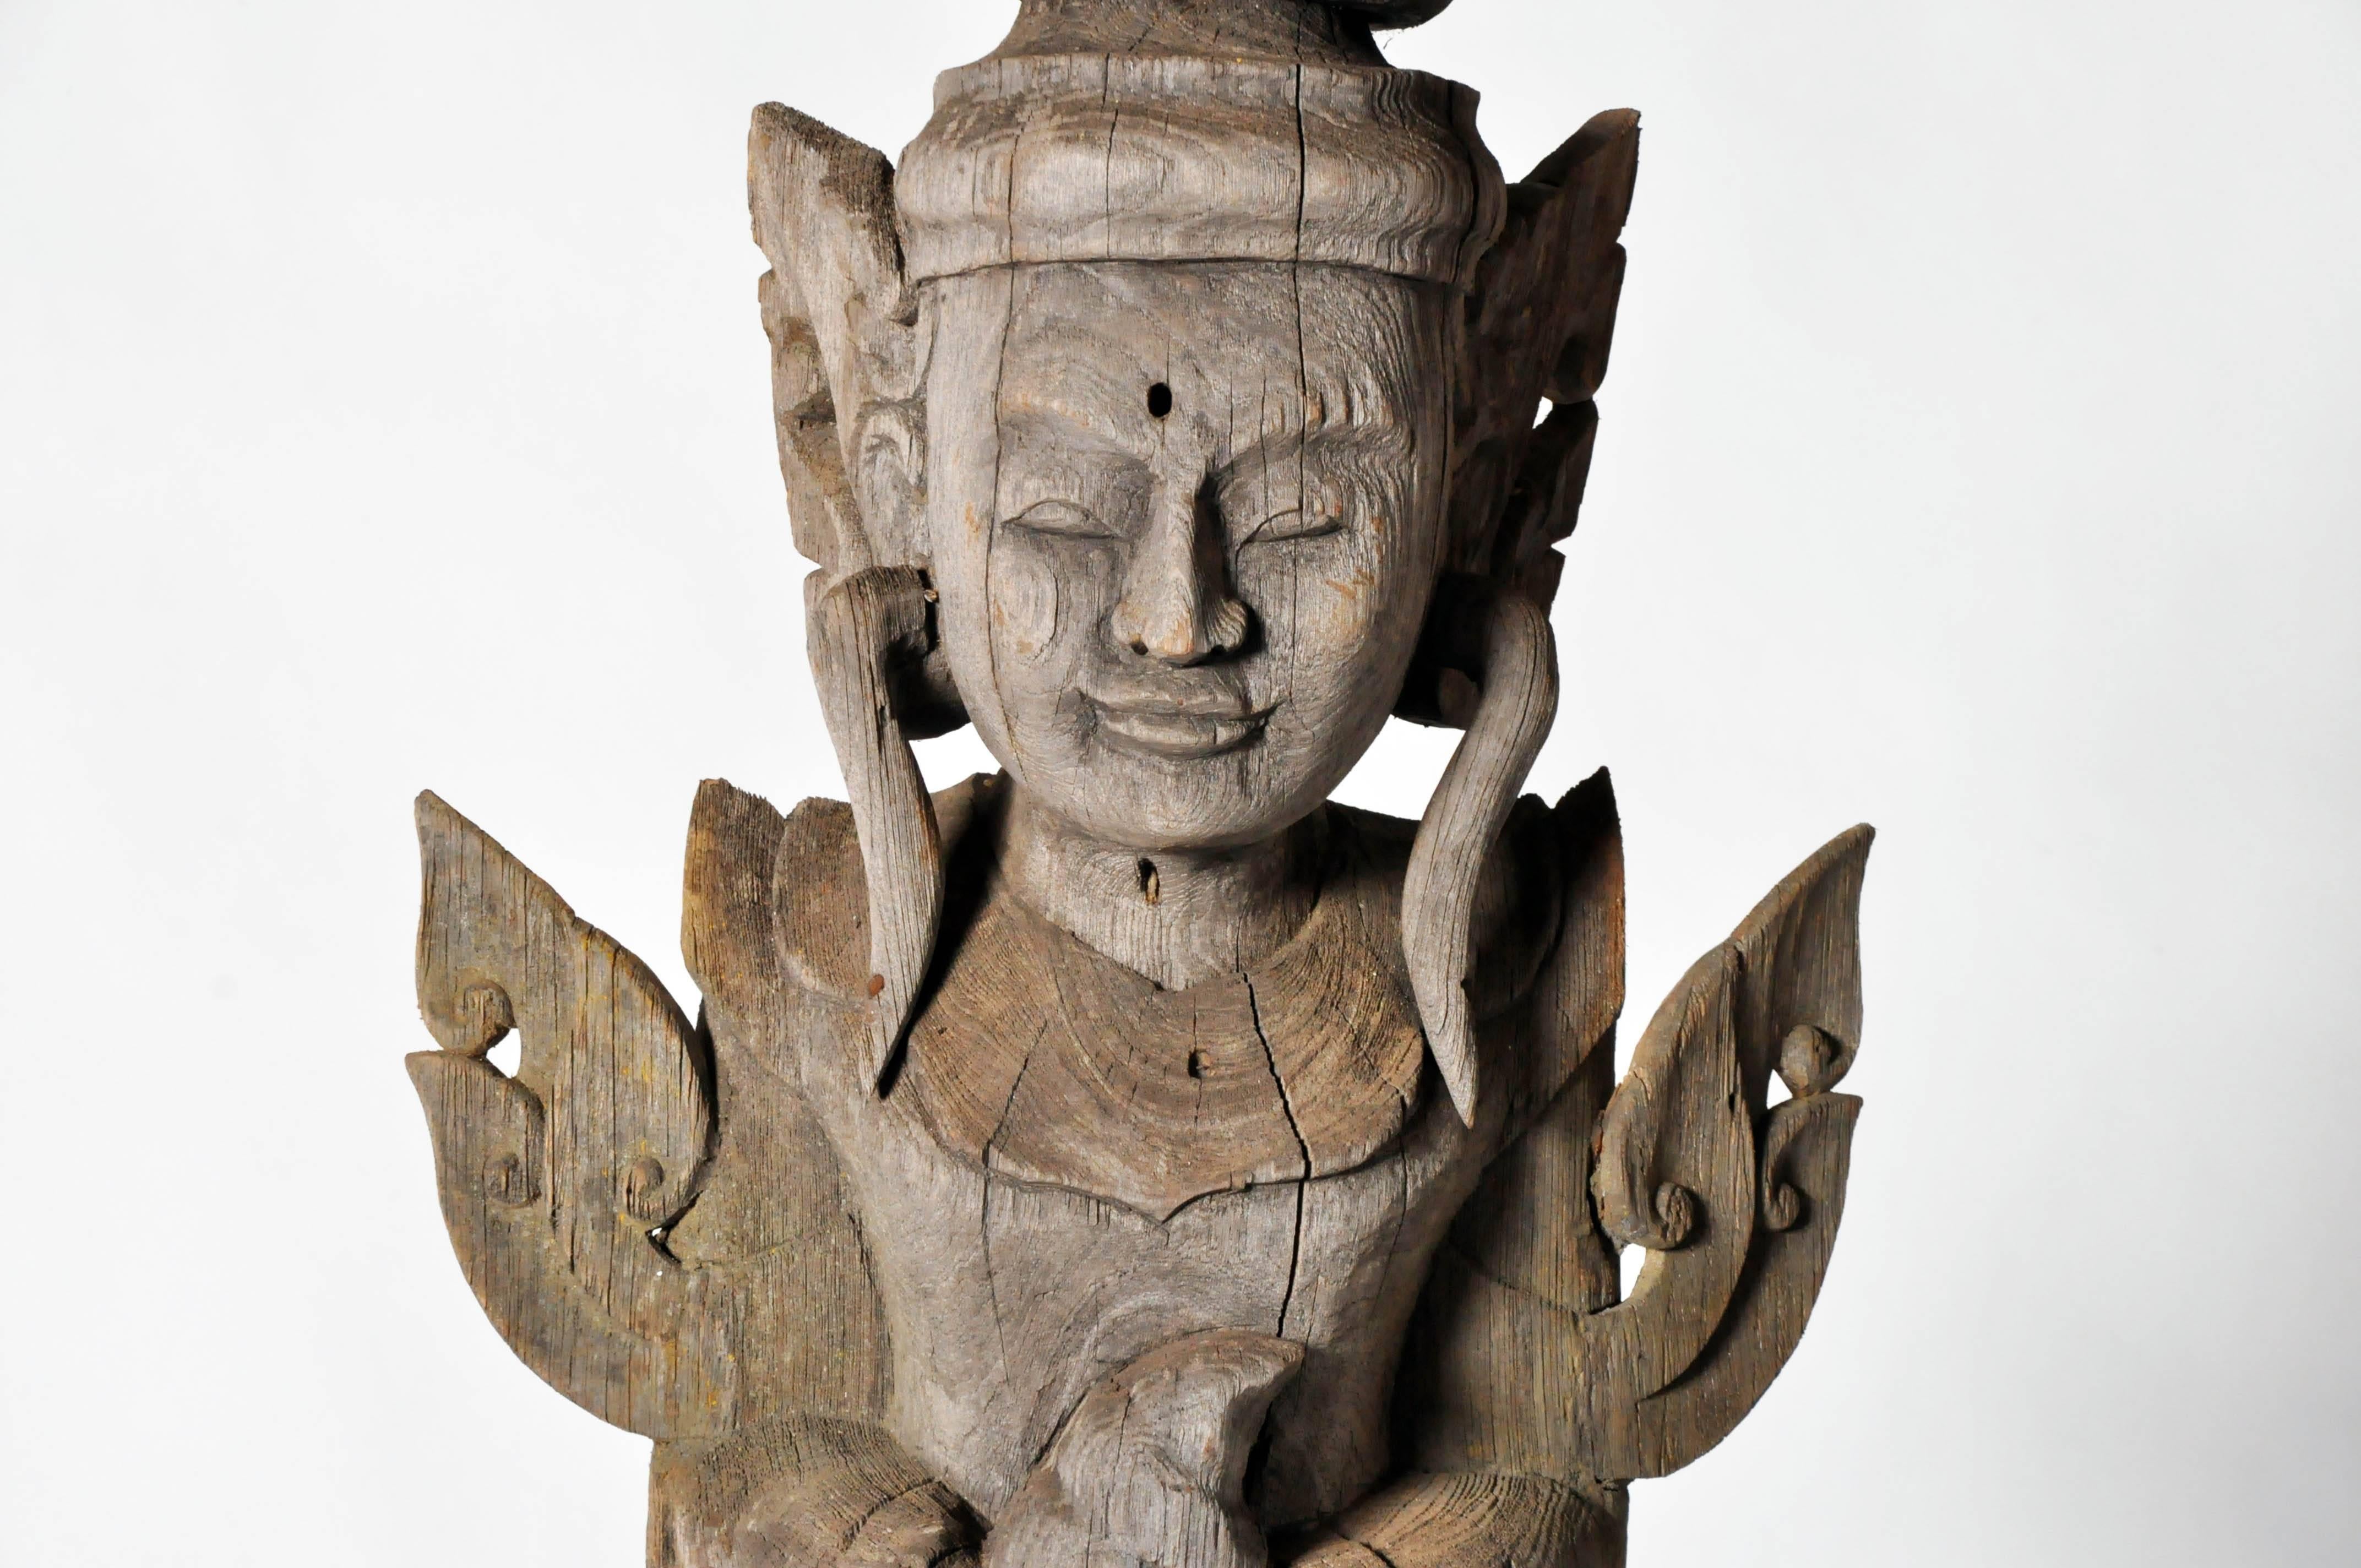 This beautiful greeting angel is from Thailand and is made from teakwood. This type of angel holds its hands clasped together in a respectful wai and wears a heavenly costume decorated with pointed winglets and a draped skirt. According to Therevada